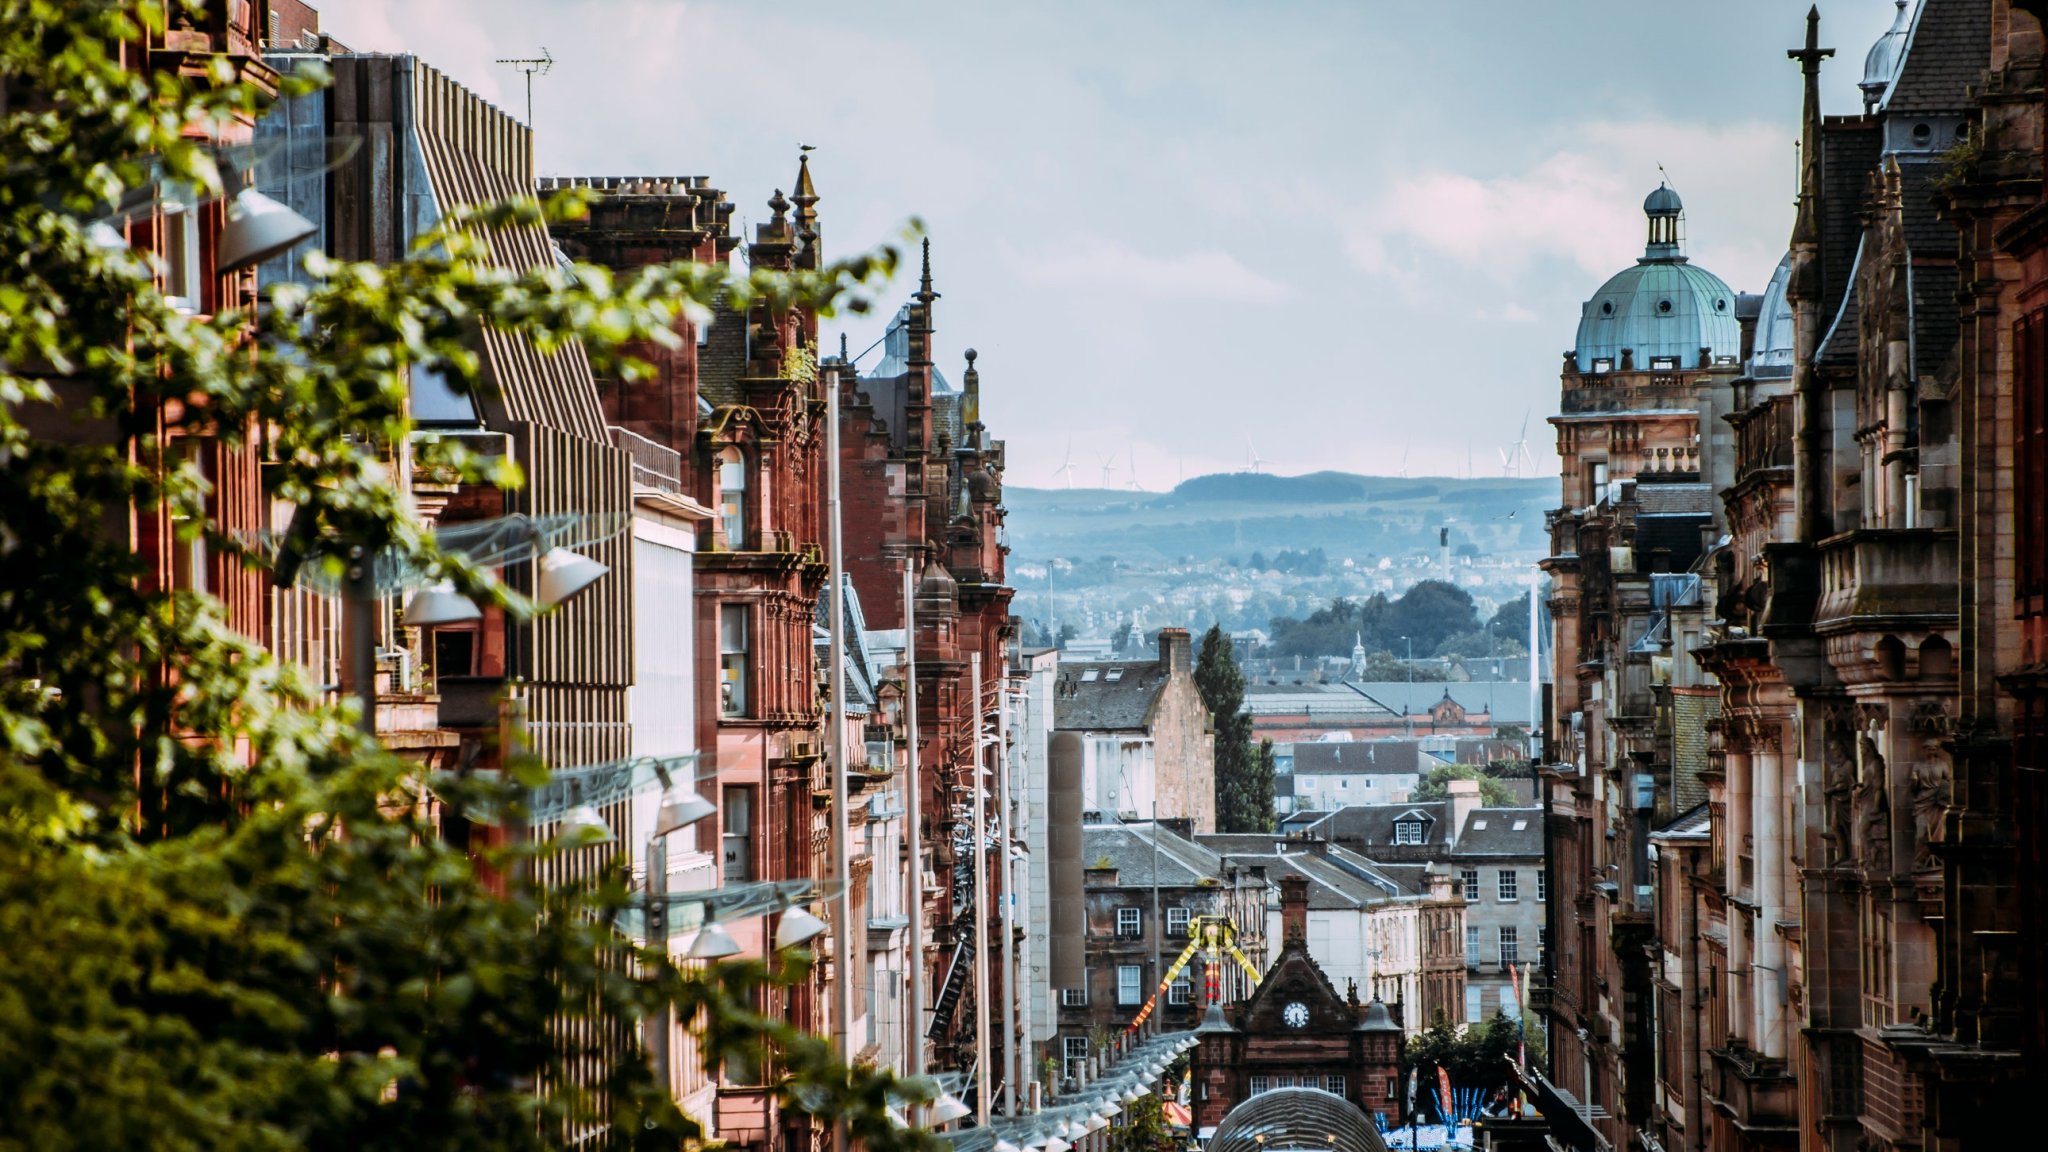 The friendliest cities in the UK: 2022 Readers' Choice Awards